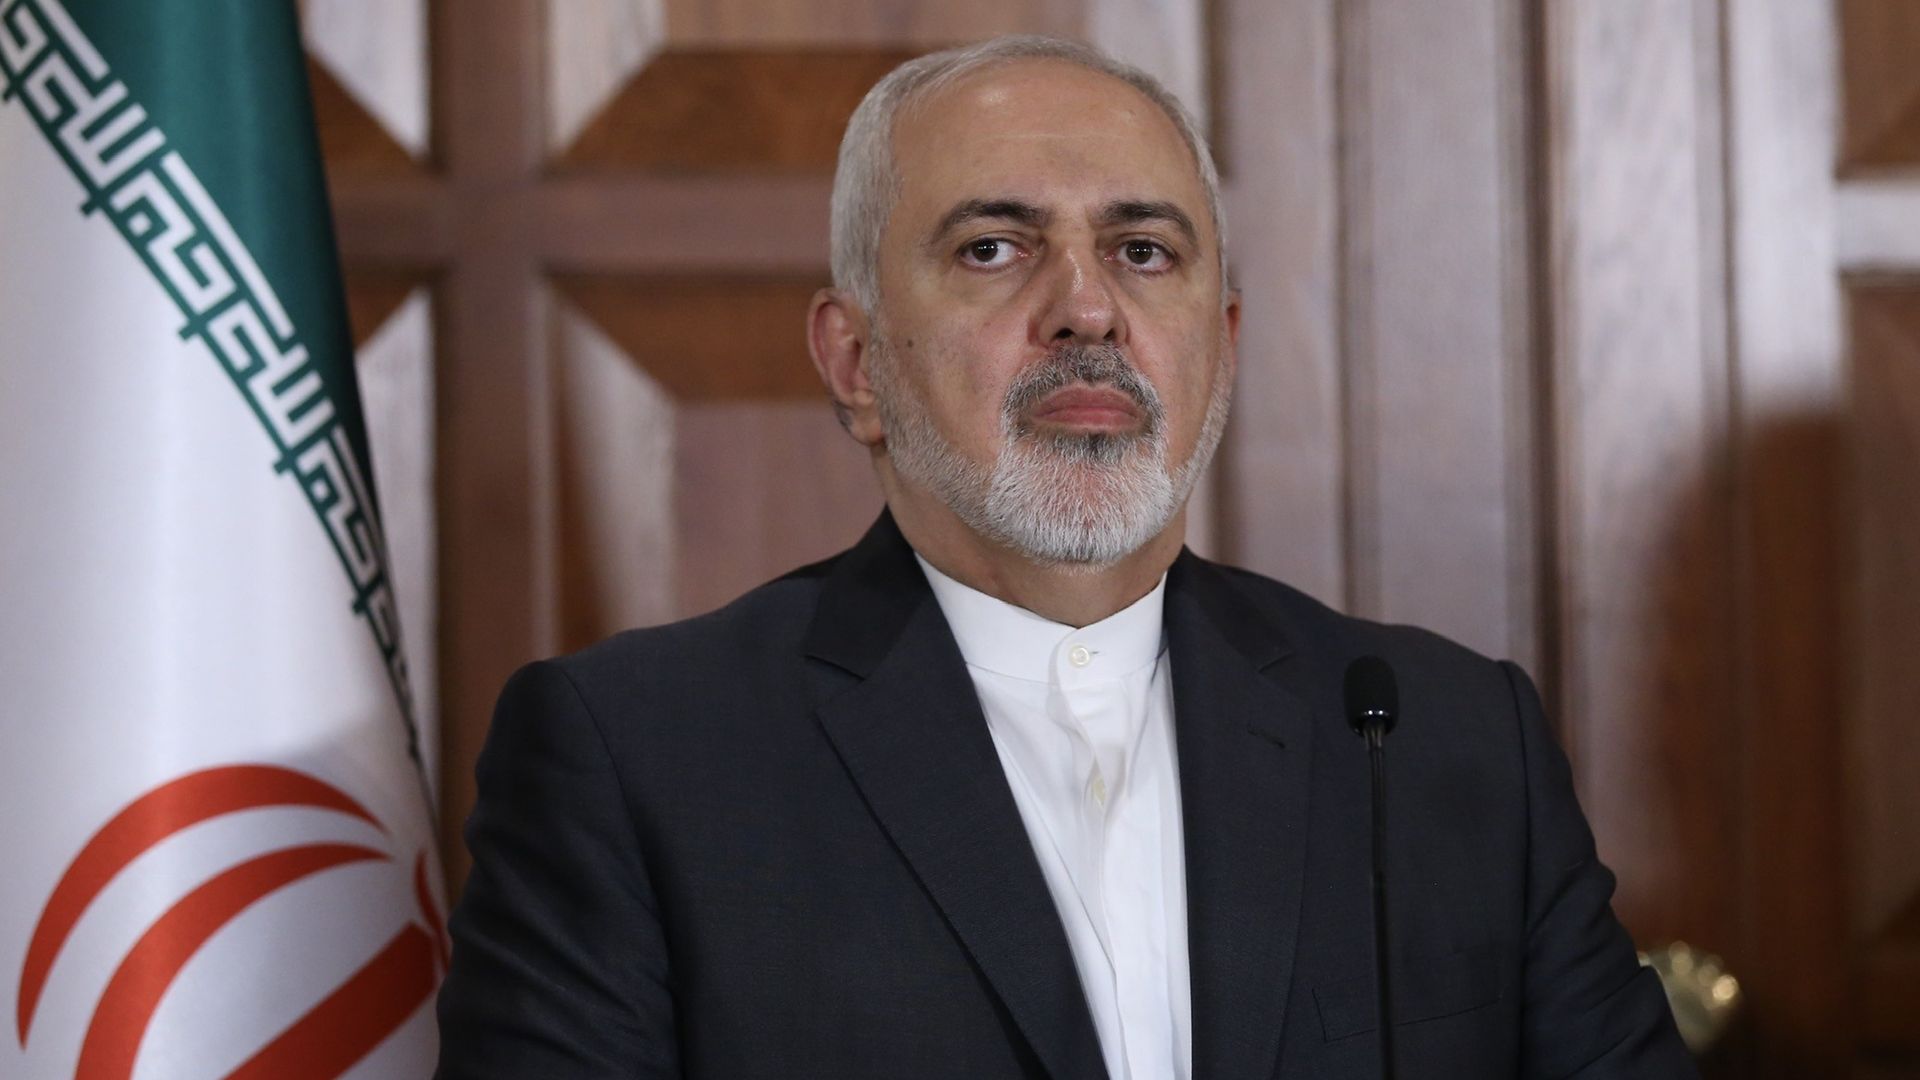 Mohammad Javad Zarif at lectern during press conference